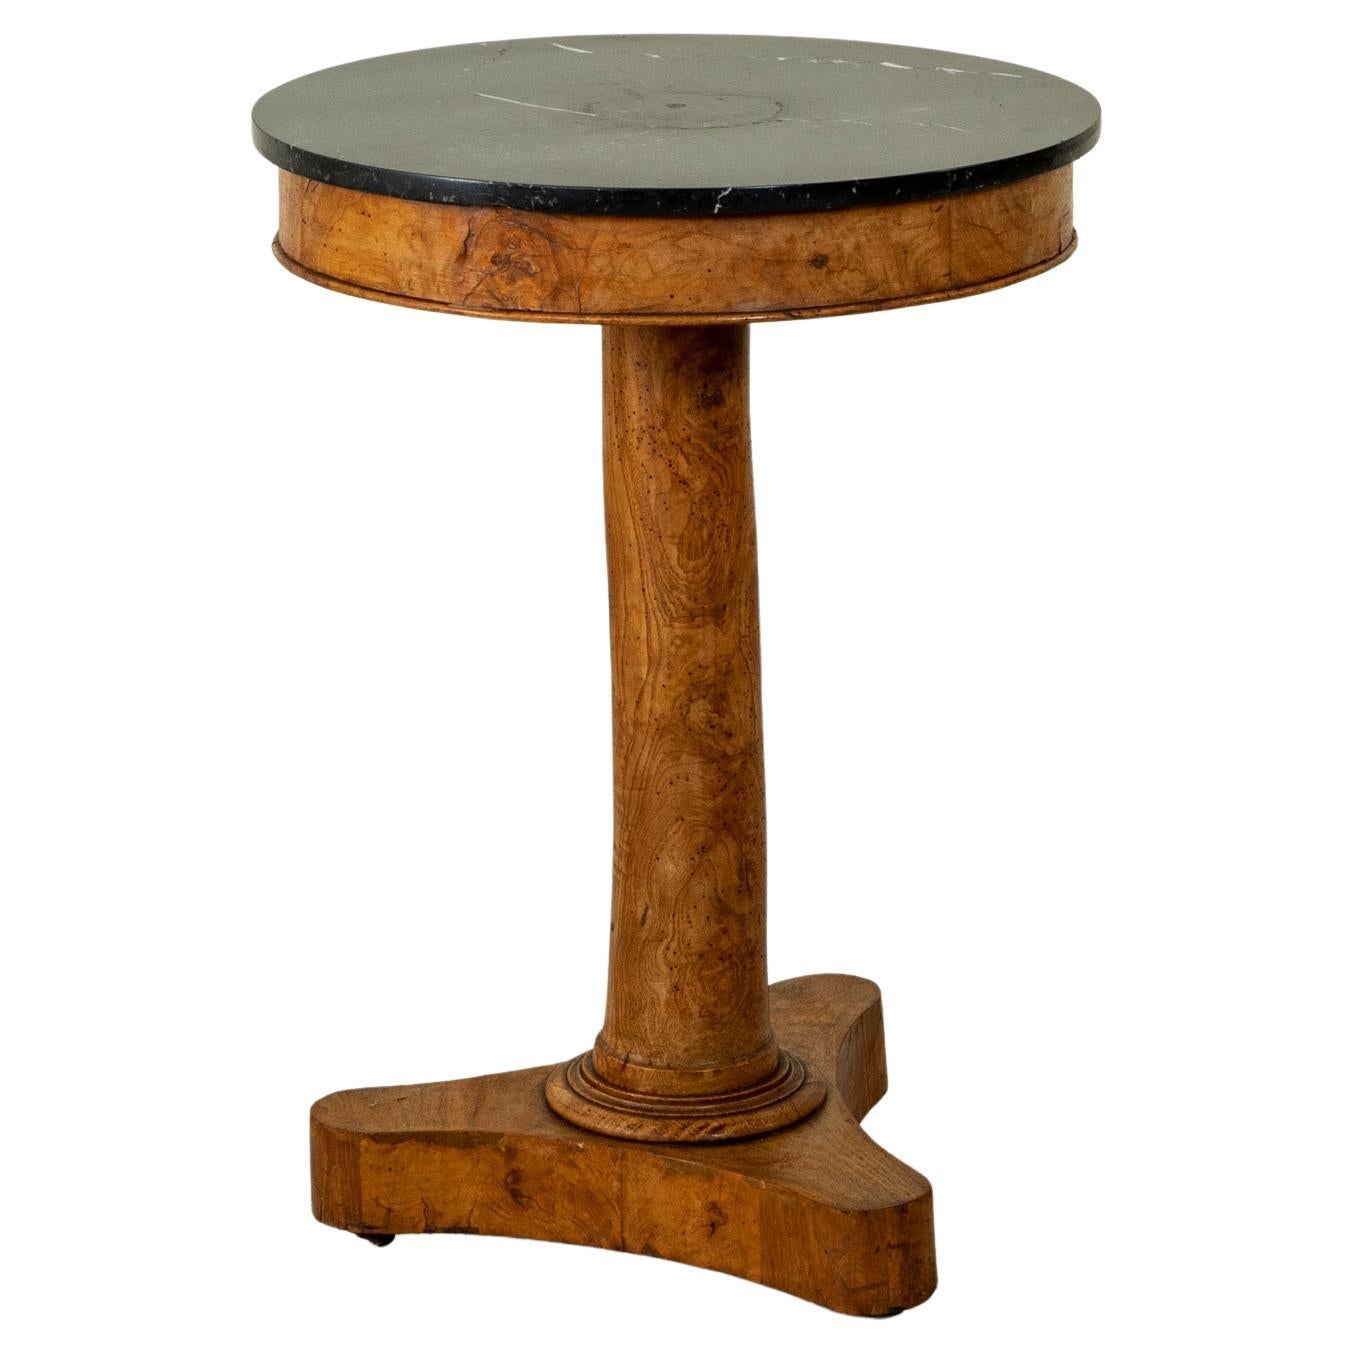 Early 19th Century French Empire Period Burl Walnut Gueridon or Pedestal Table